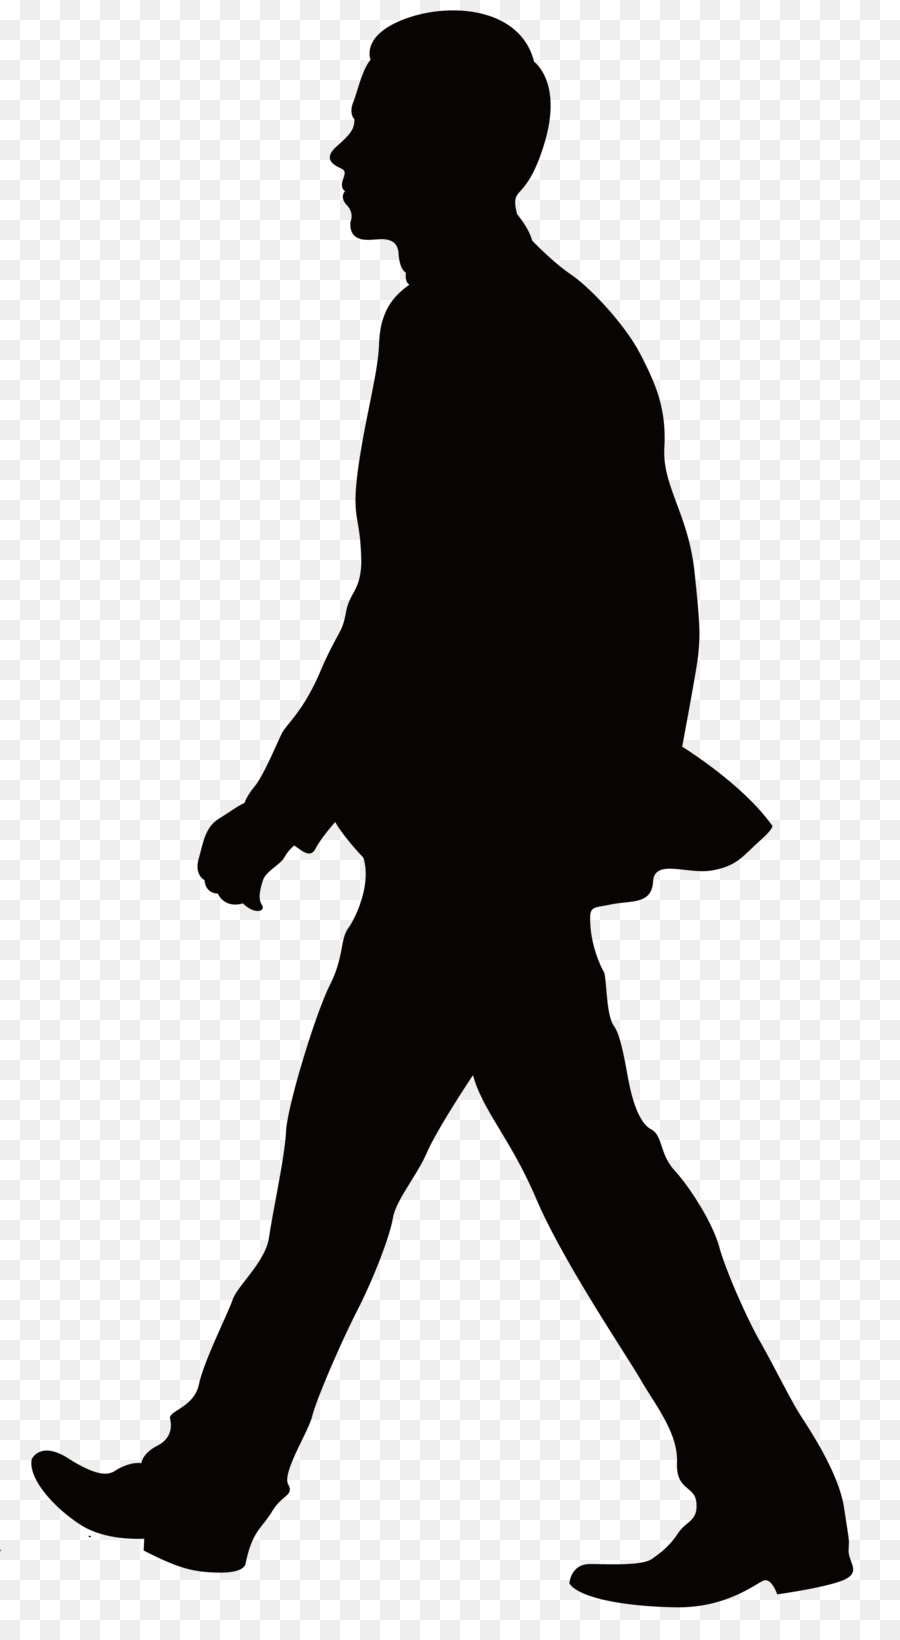 Silhouette Clip art - Male Silhouette PNG Clip Art png download - 3019* ...